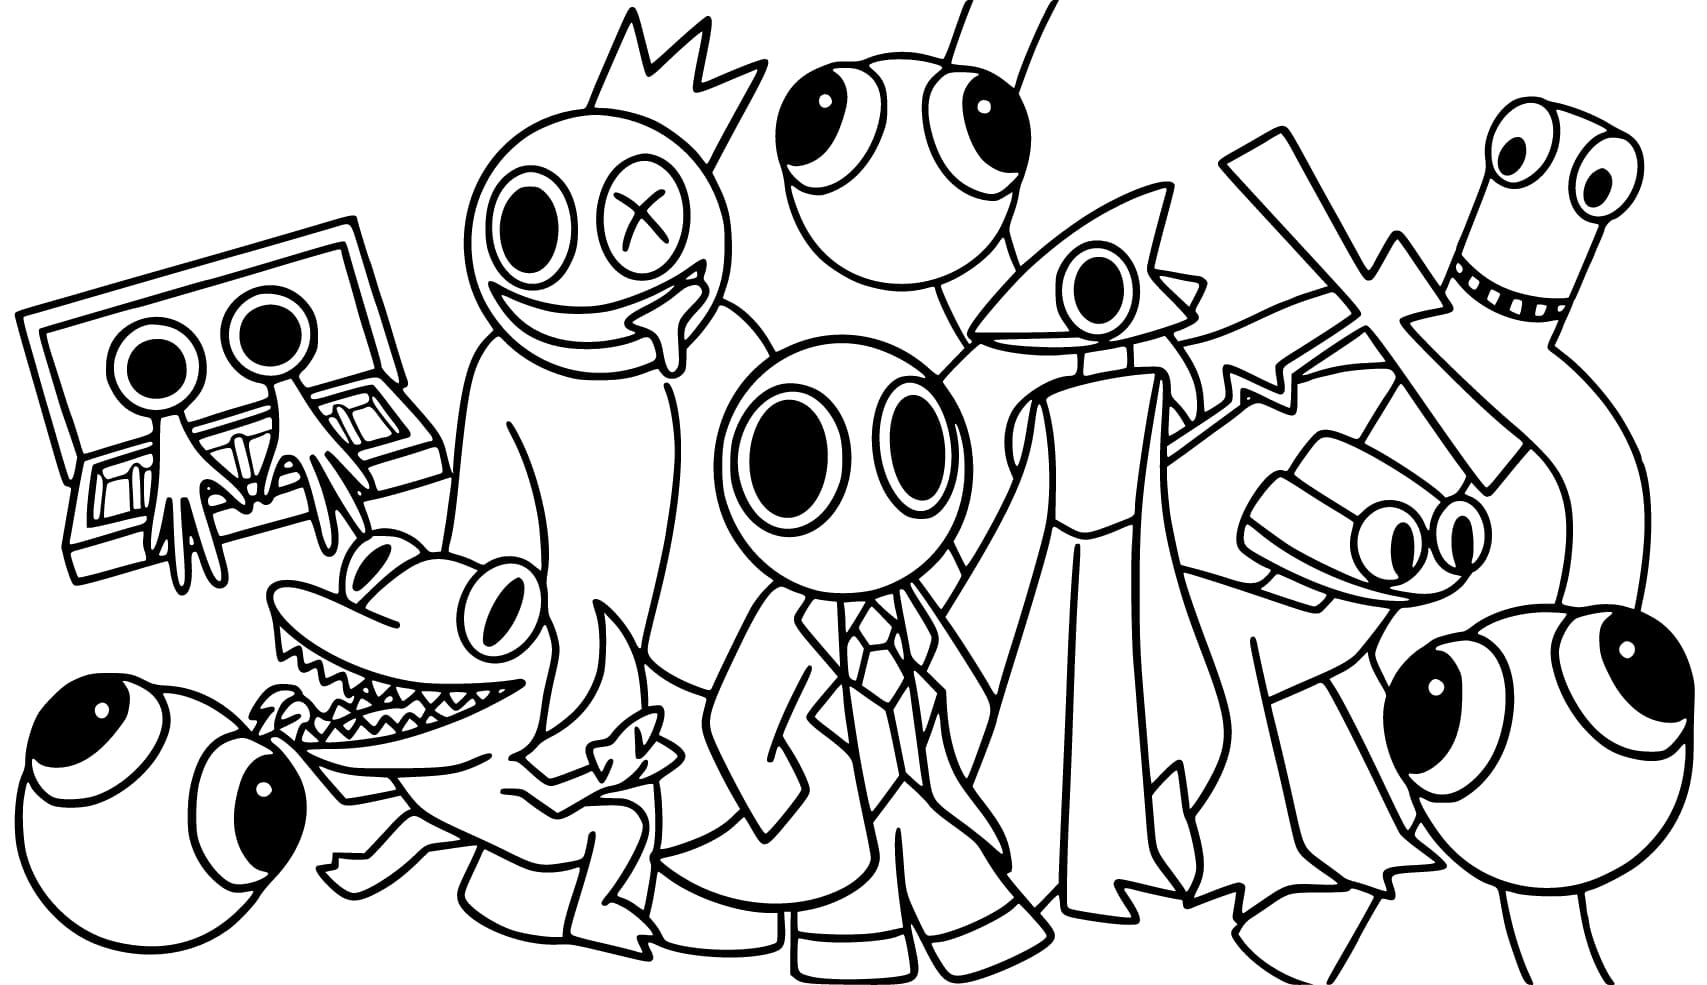 Explore vibrant imagination with rainbow friends coloring pages